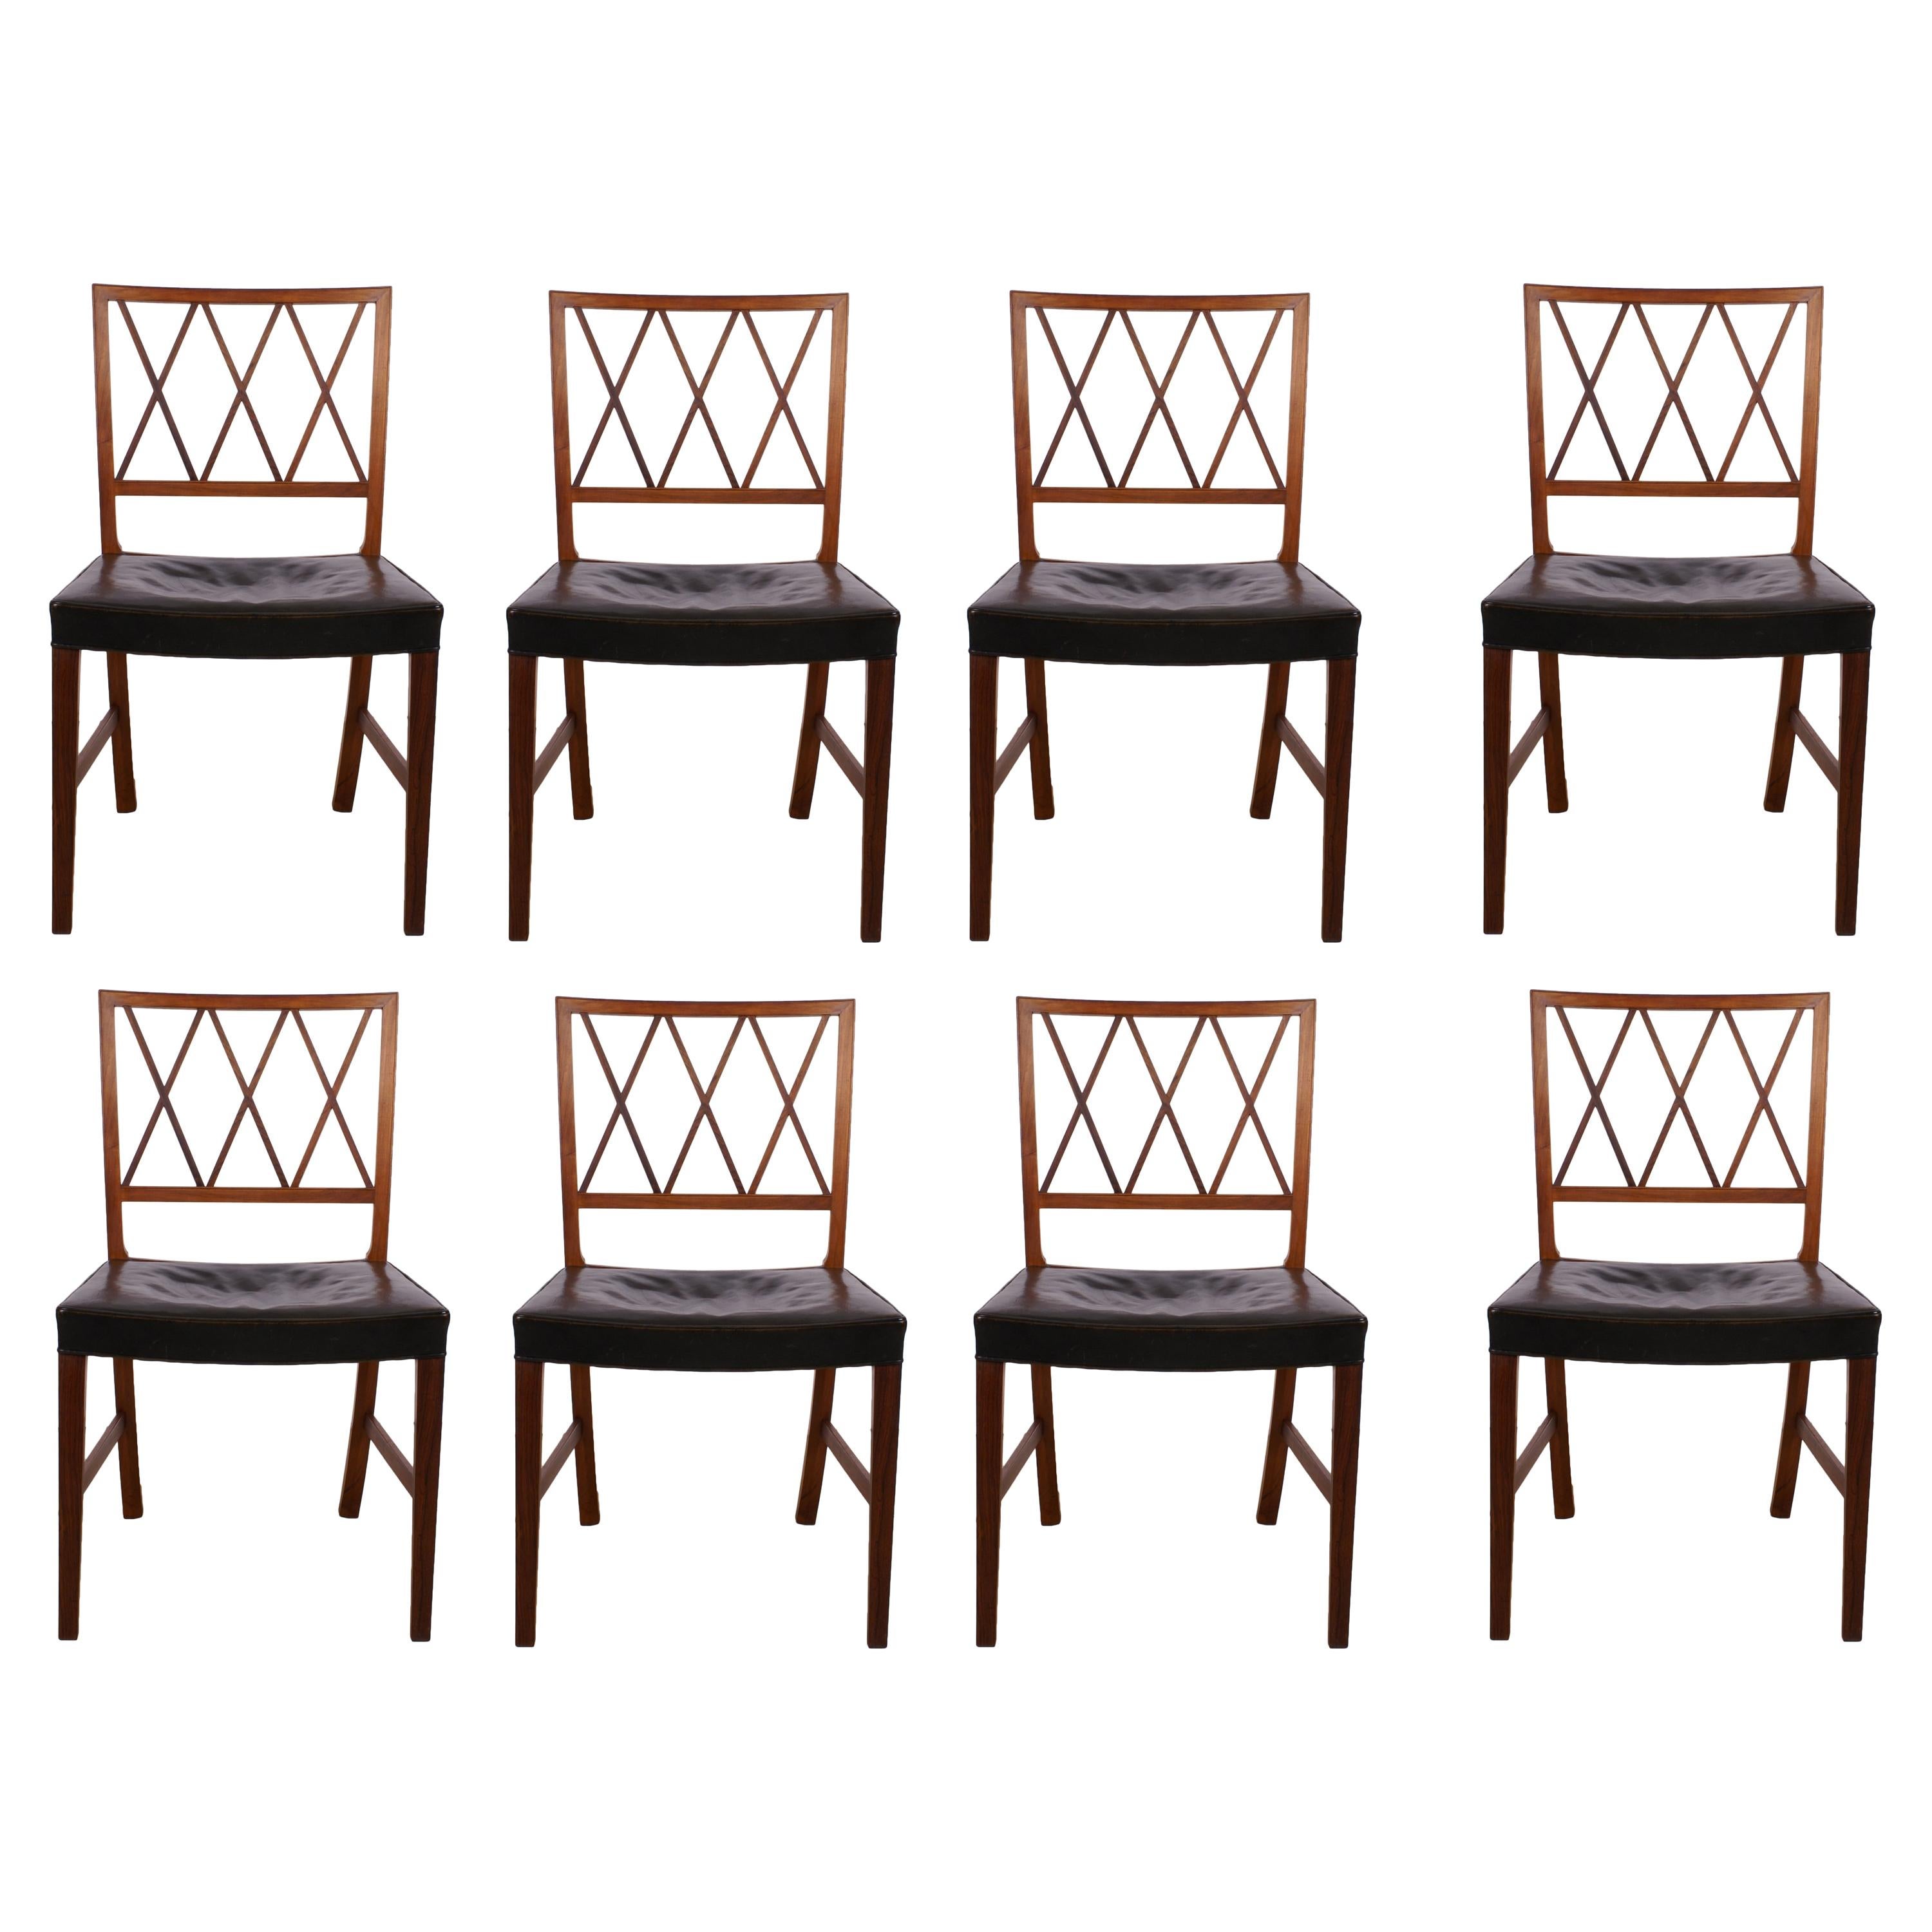 Ole Wanscher Set of 8 Dining Chairs, Rosewood by Cabinetmaker A.J. Iversen, 1942